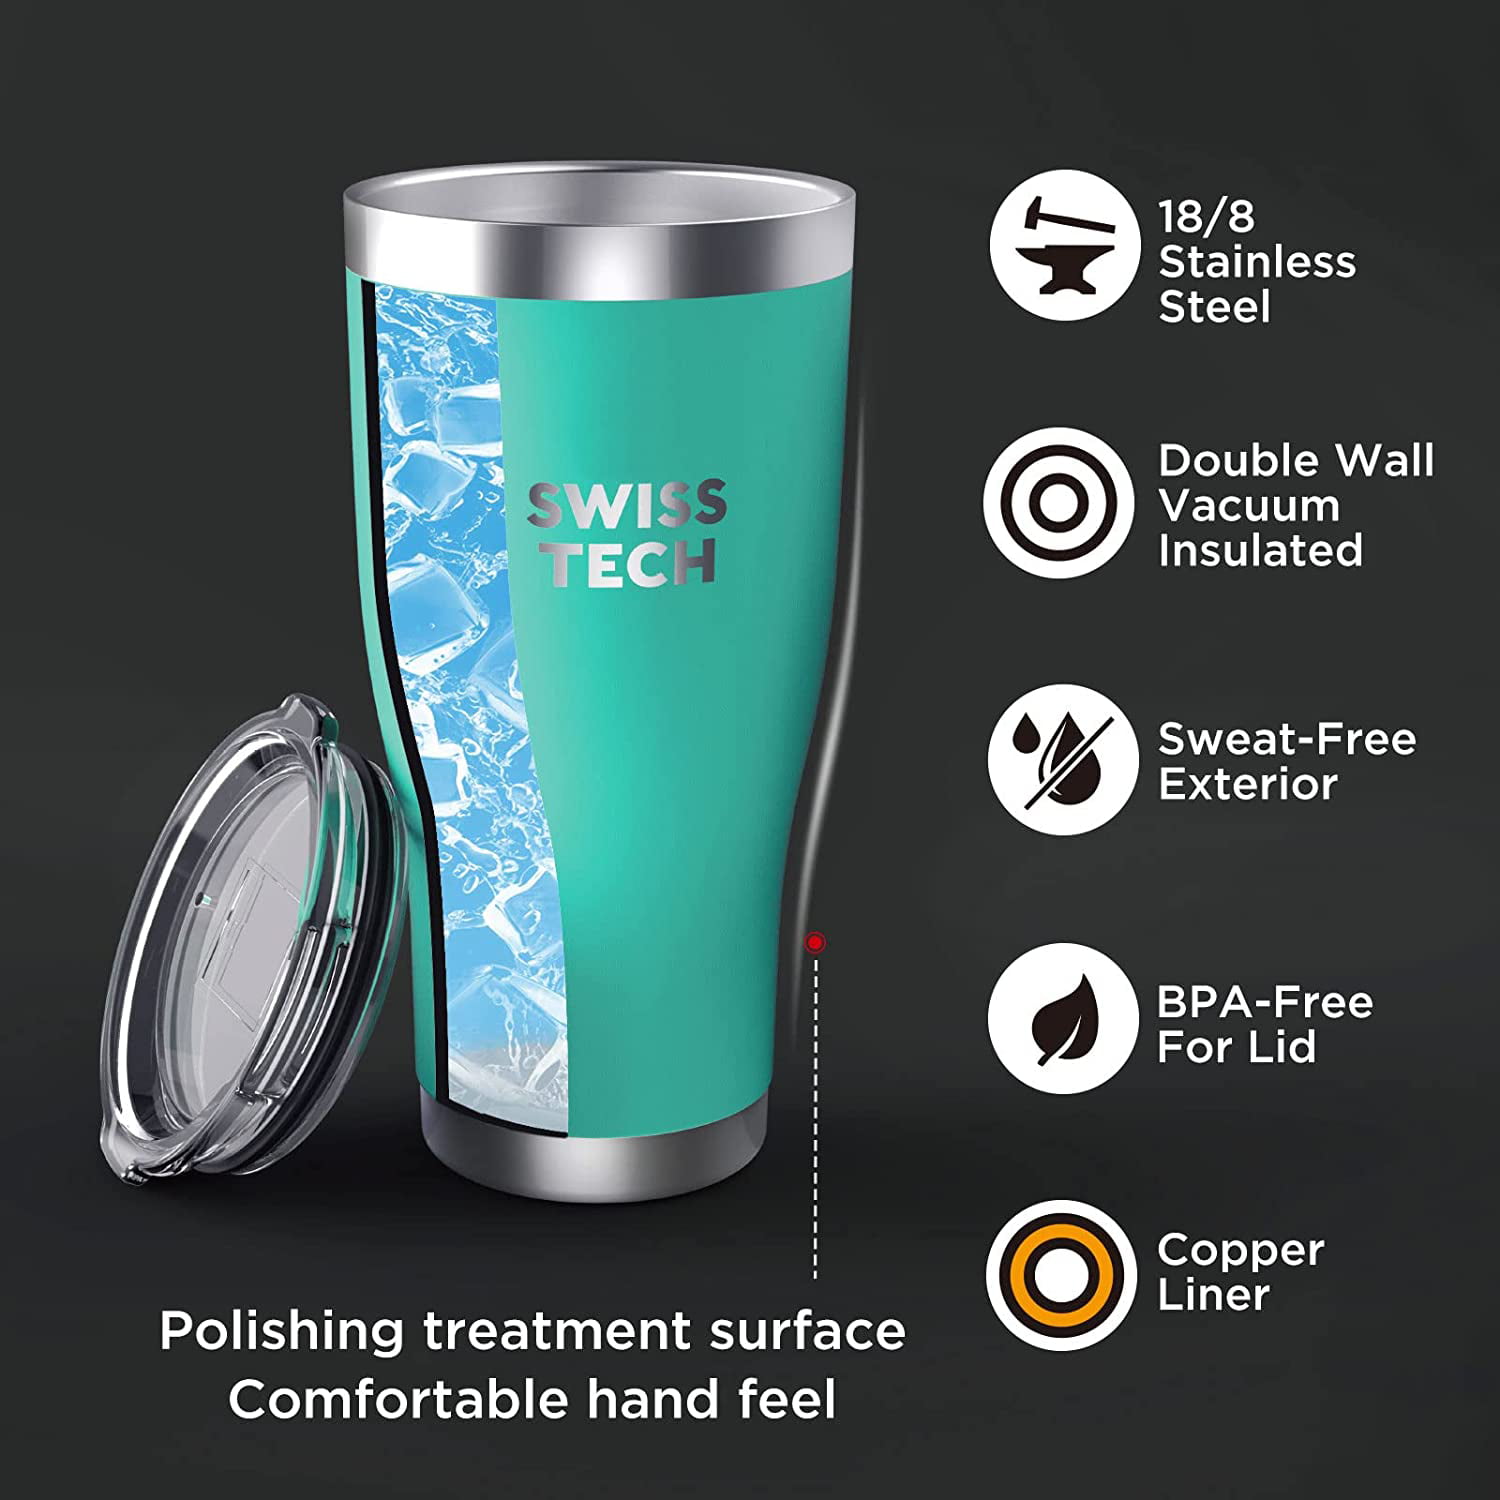 Swiss+Tech 30 oz Tumbler, Stainless Double Wall Vacuum Insulated Tumbler with Lid and Wide Mouth, for Travel, Gym & Daily Use, BPA Free, Green Turquoi